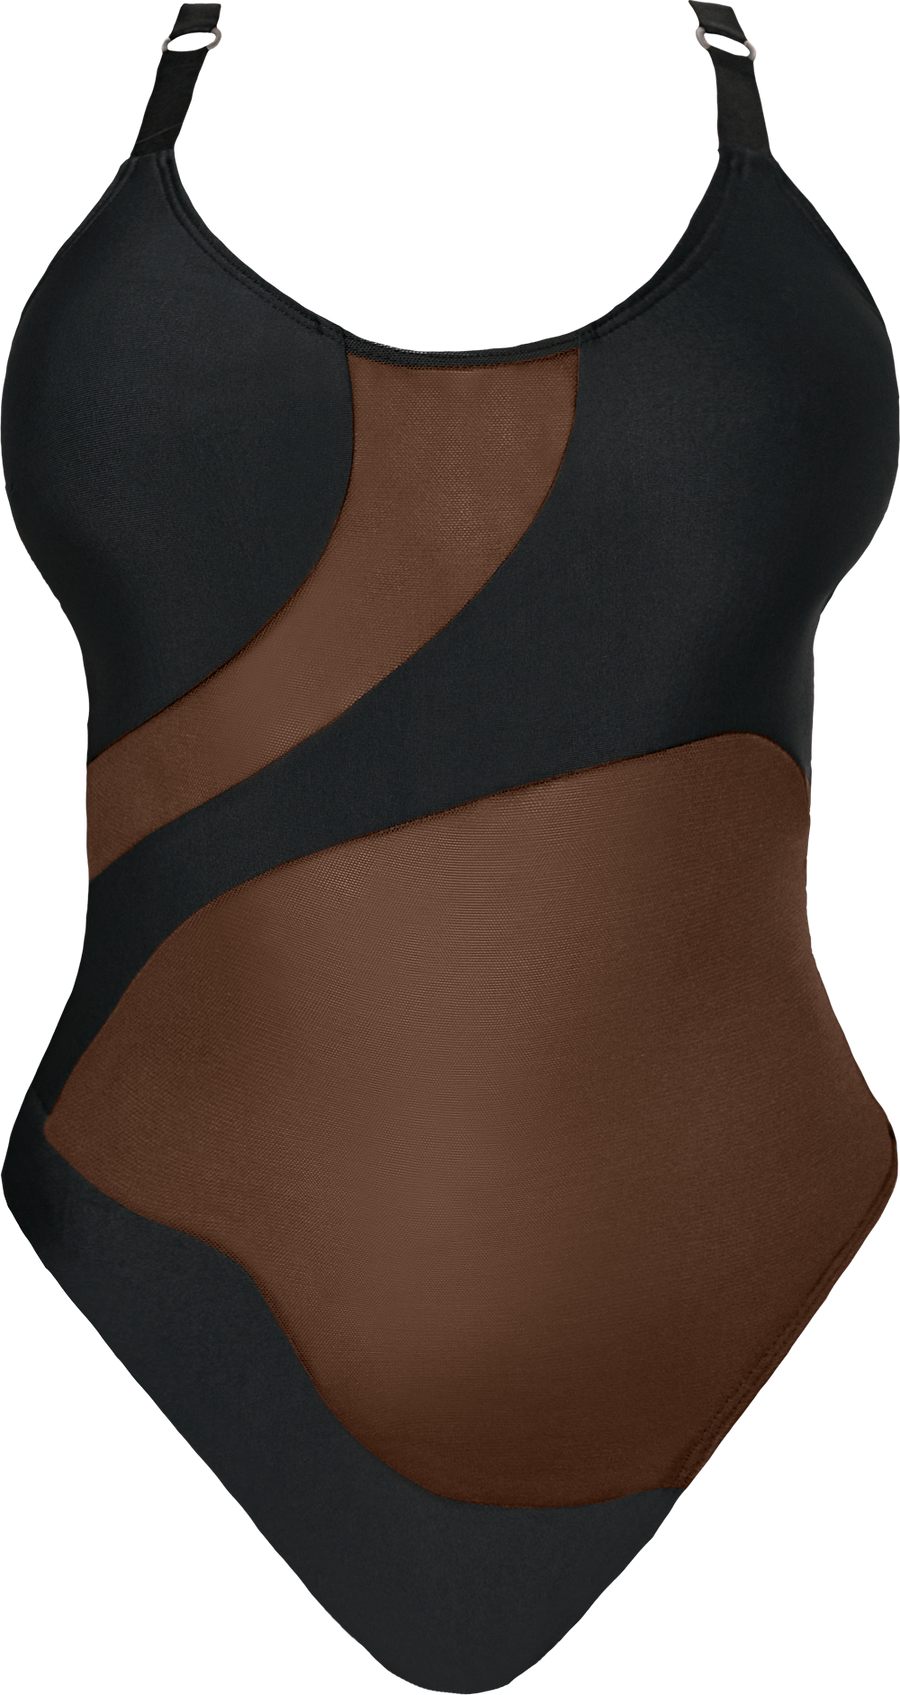 Silhouette One-Piece Body Suit Black with Cocoa Mesh